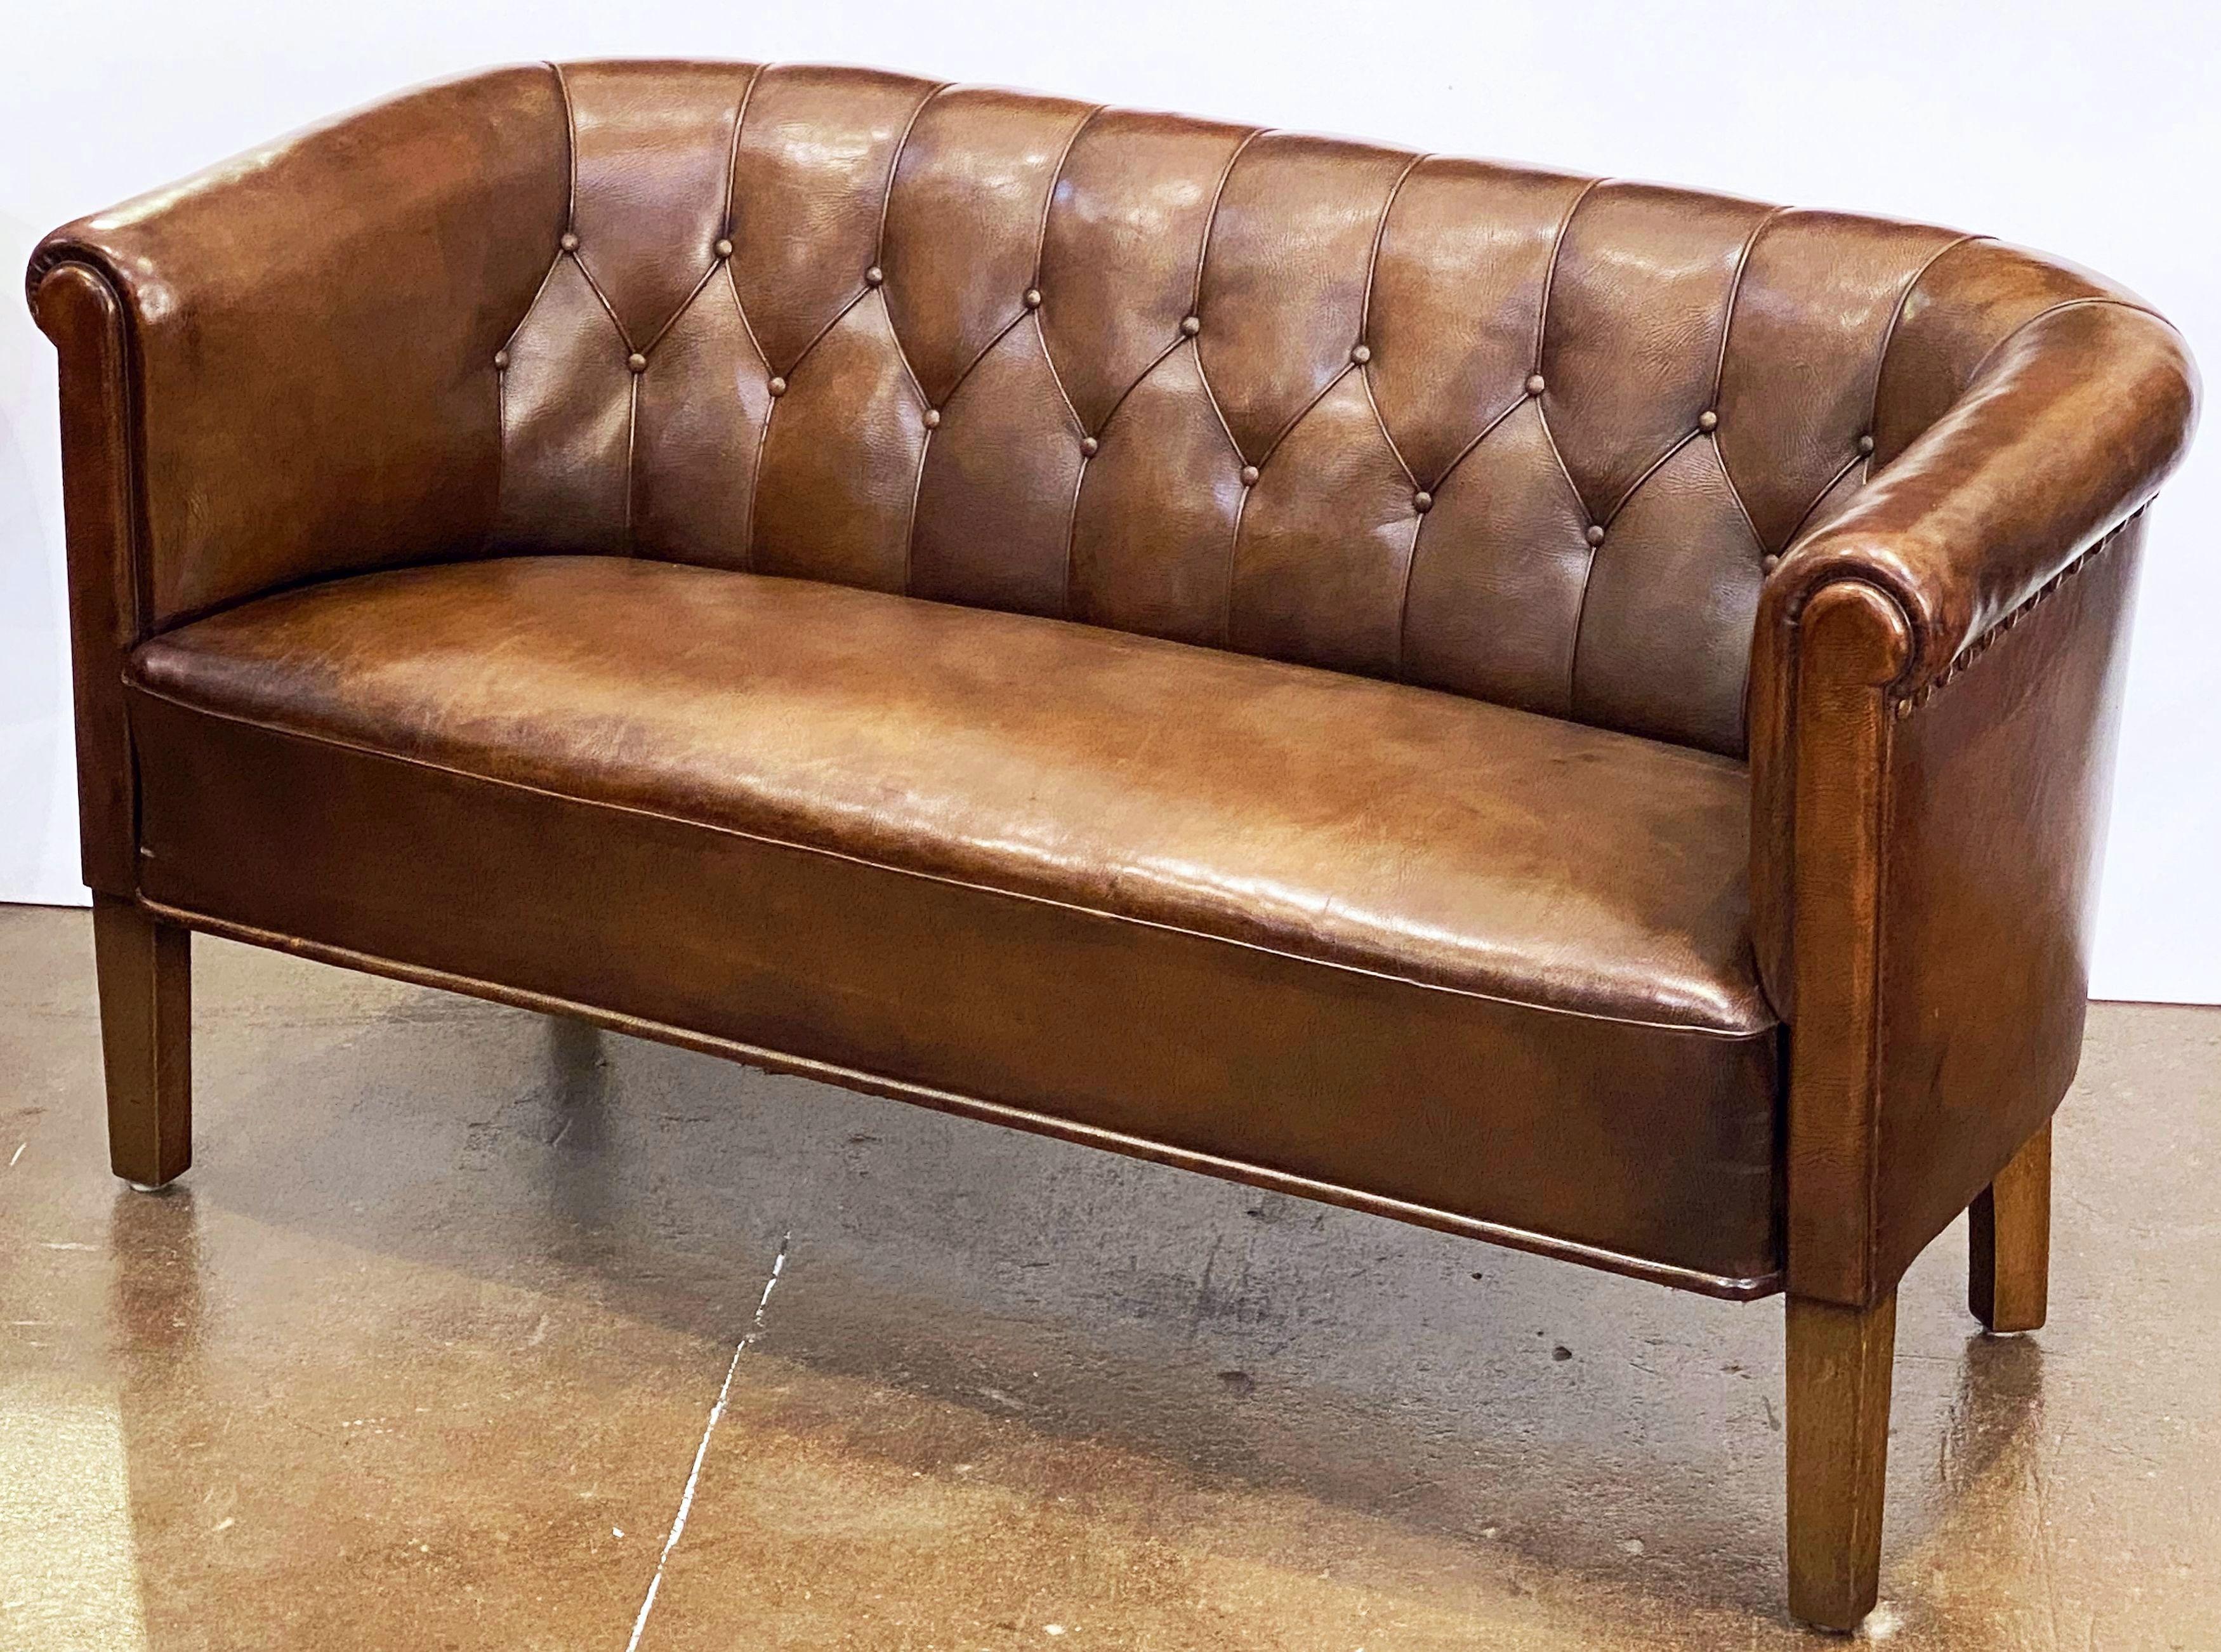 20th Century Swedish Mid-Century Modern Leather Sofa or Settee with Tufted Back